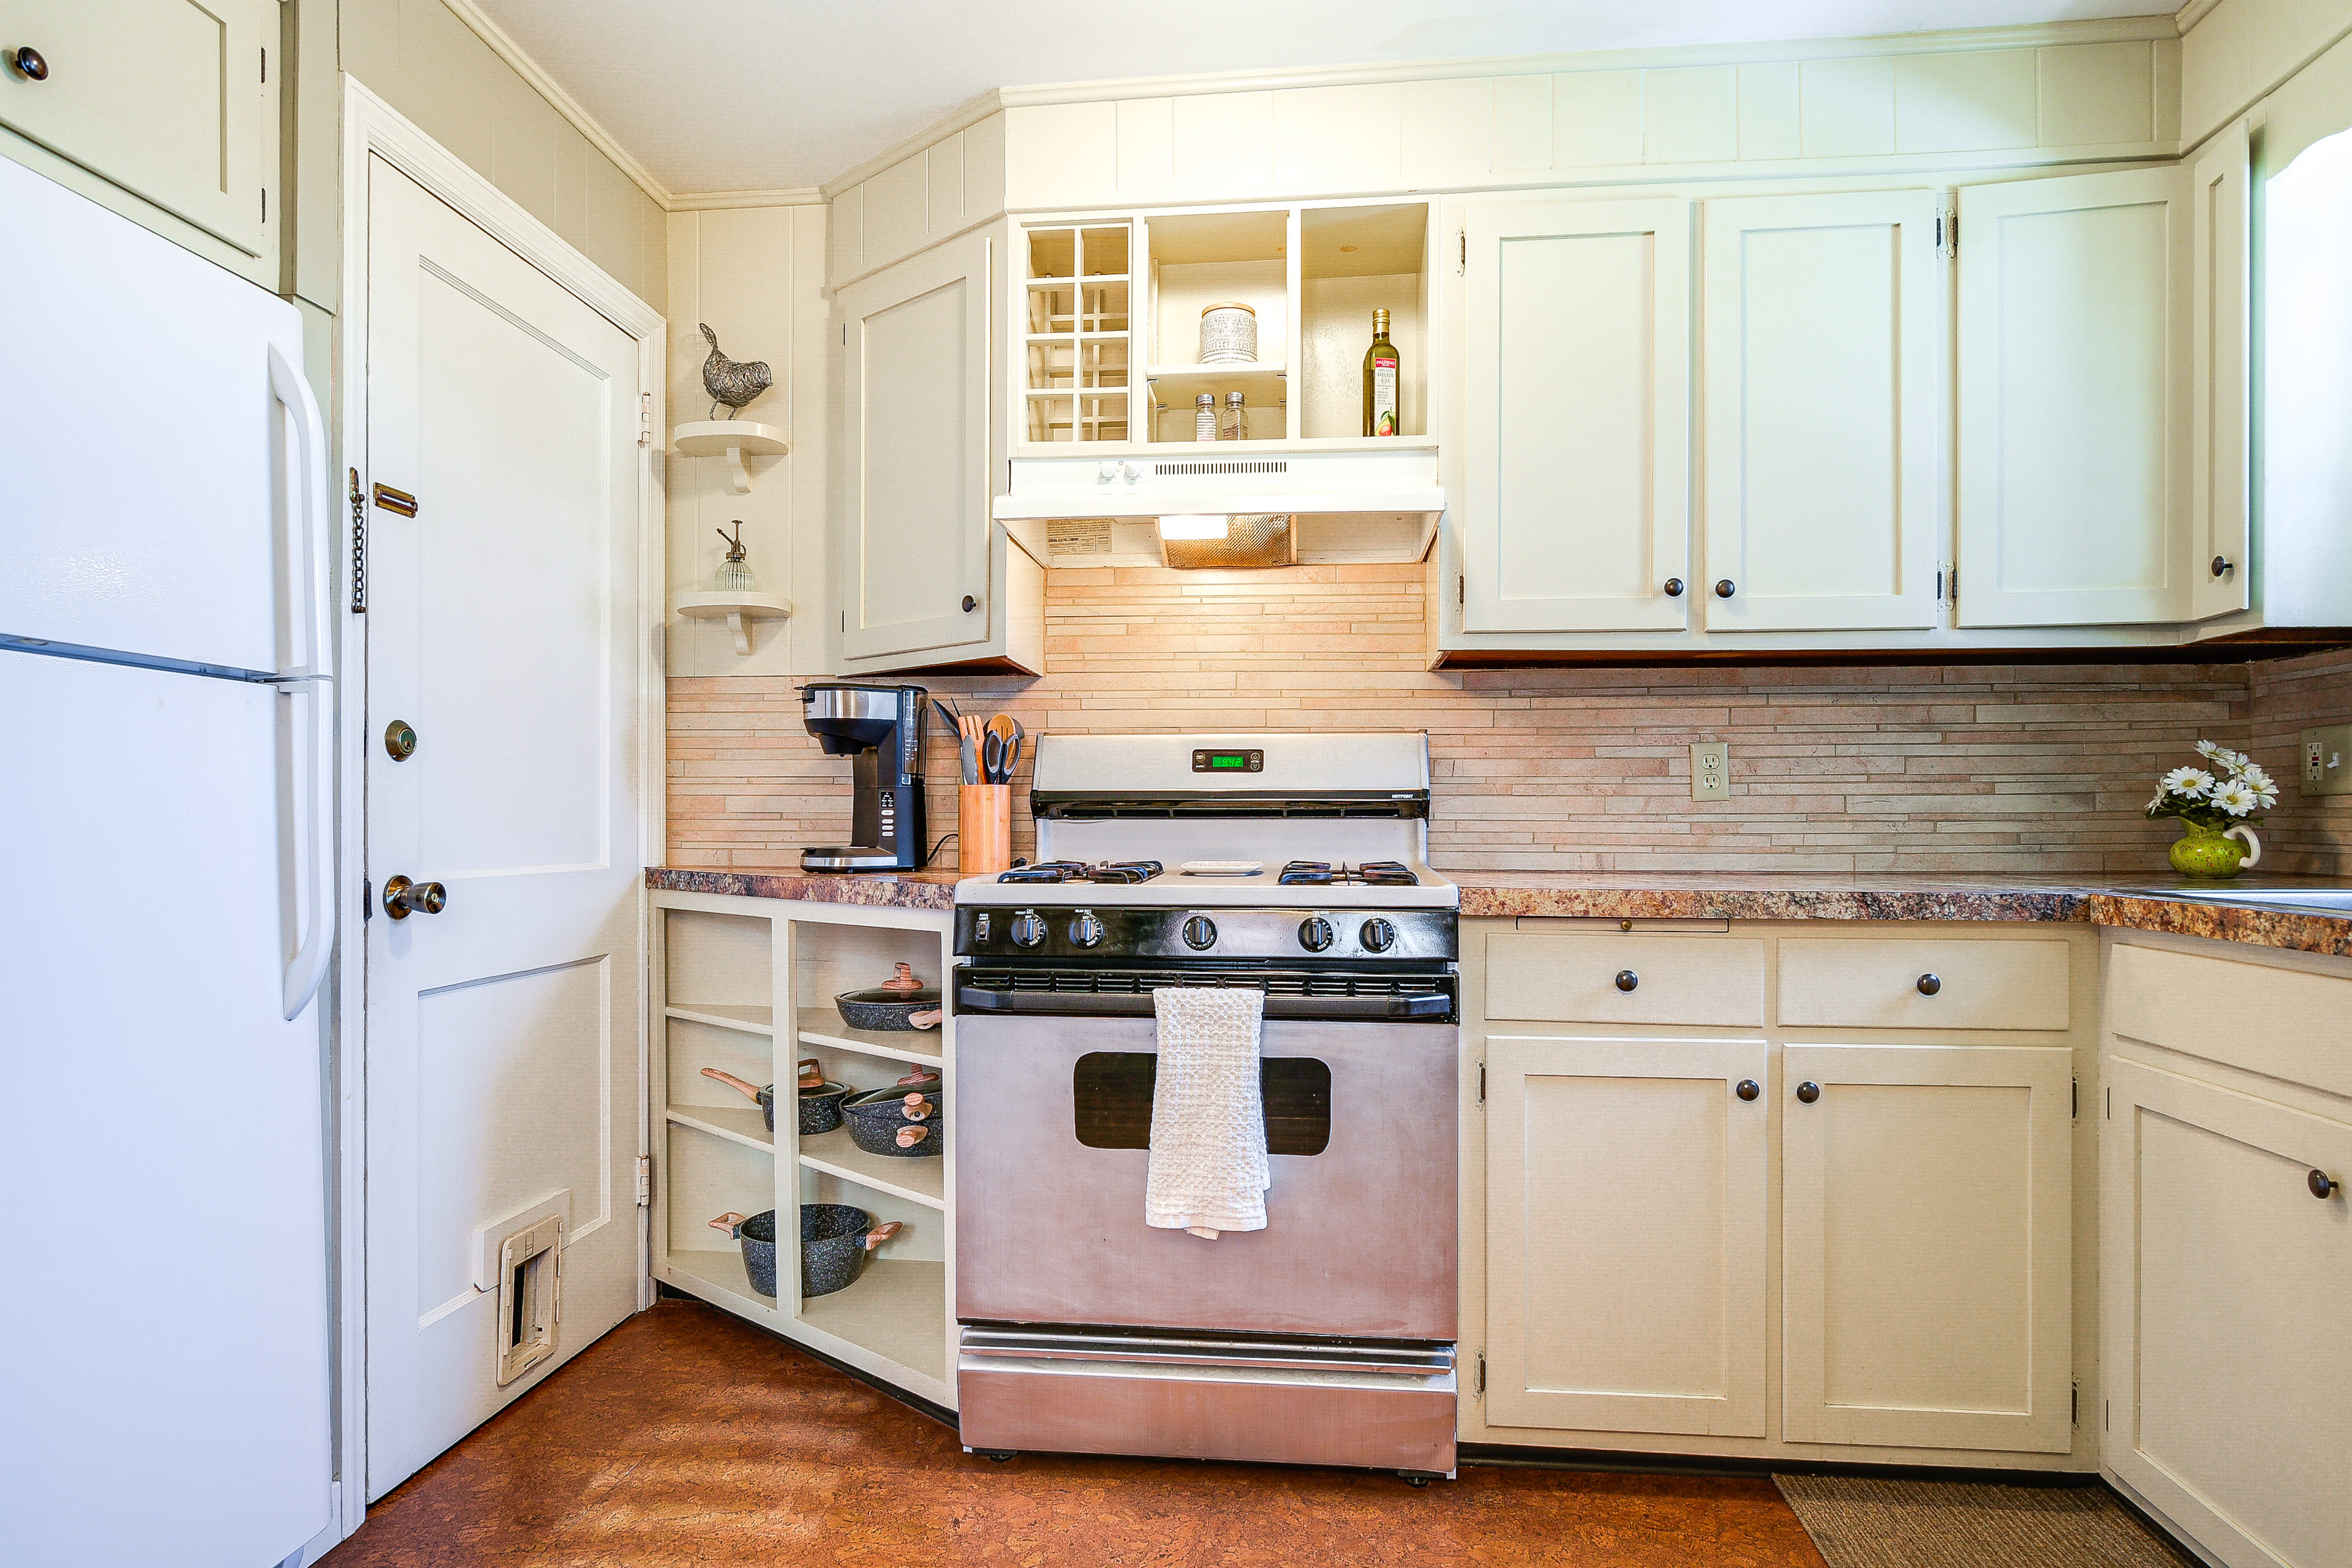 Kitchen | 1st Floor | Cooking Basics | Drip Coffee Maker | Microwave